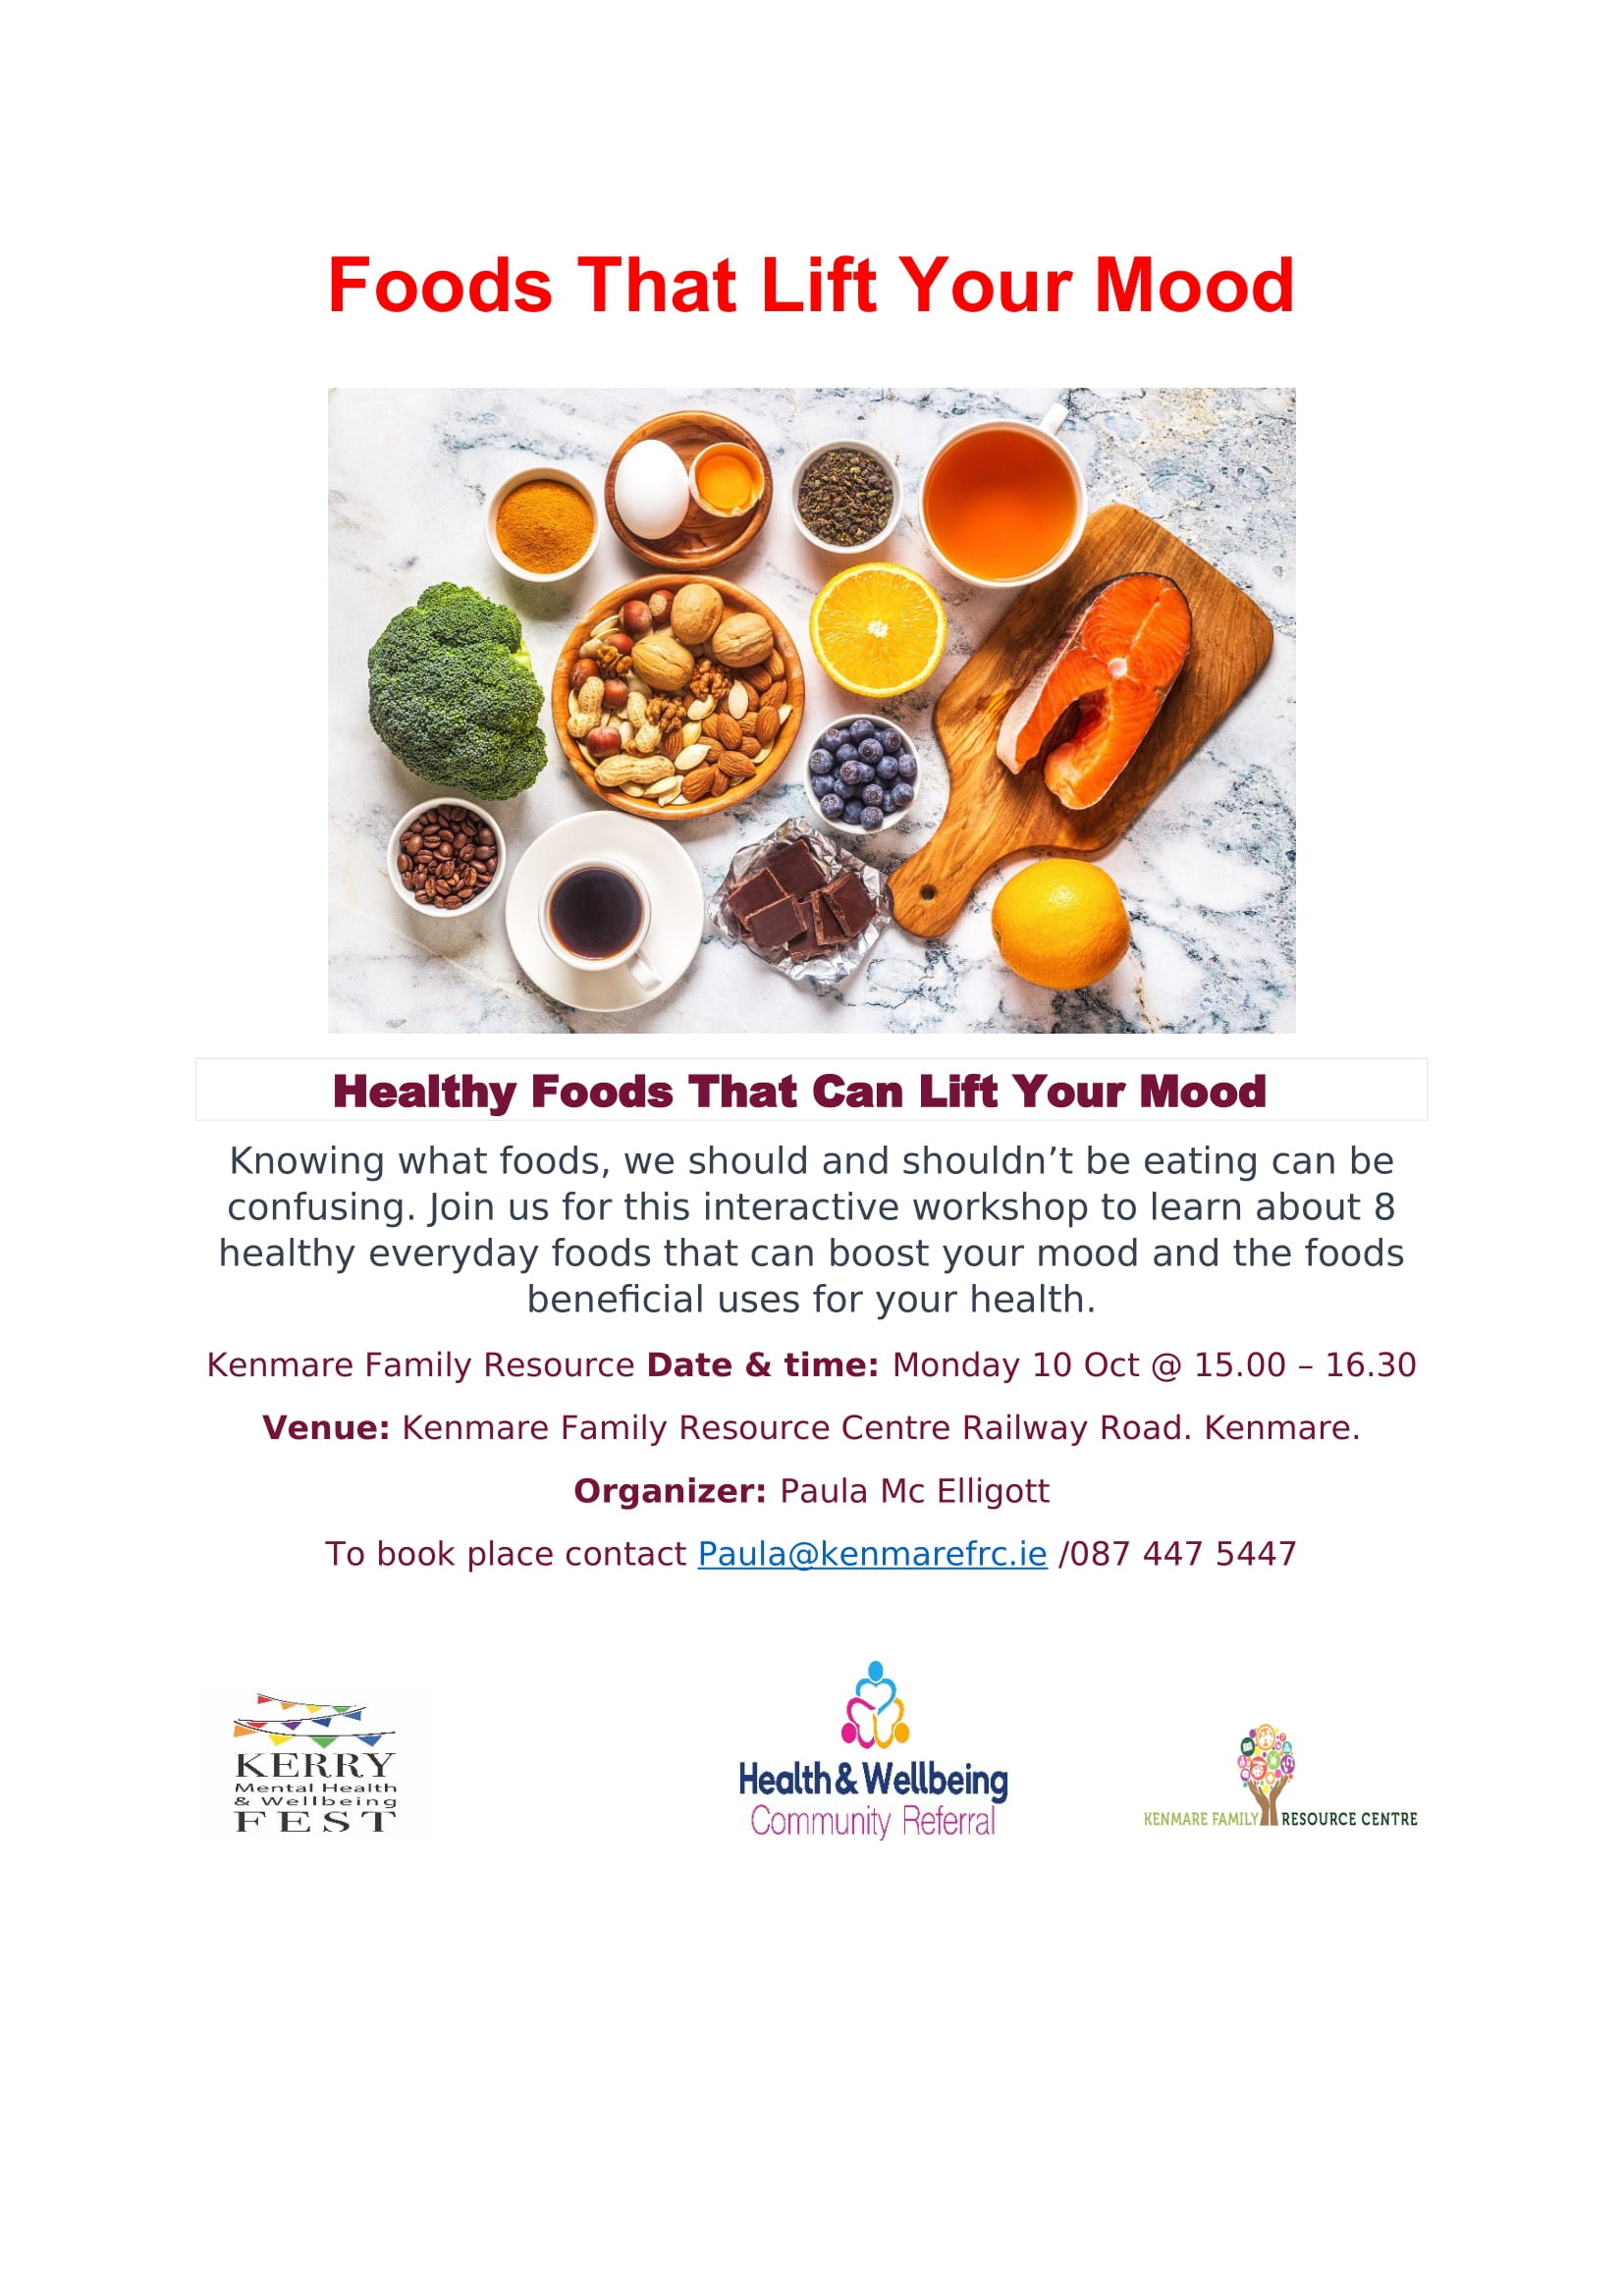 Foods That Lift Your Mood event at Kerry Mental Health & Wellbeing Fest 2022